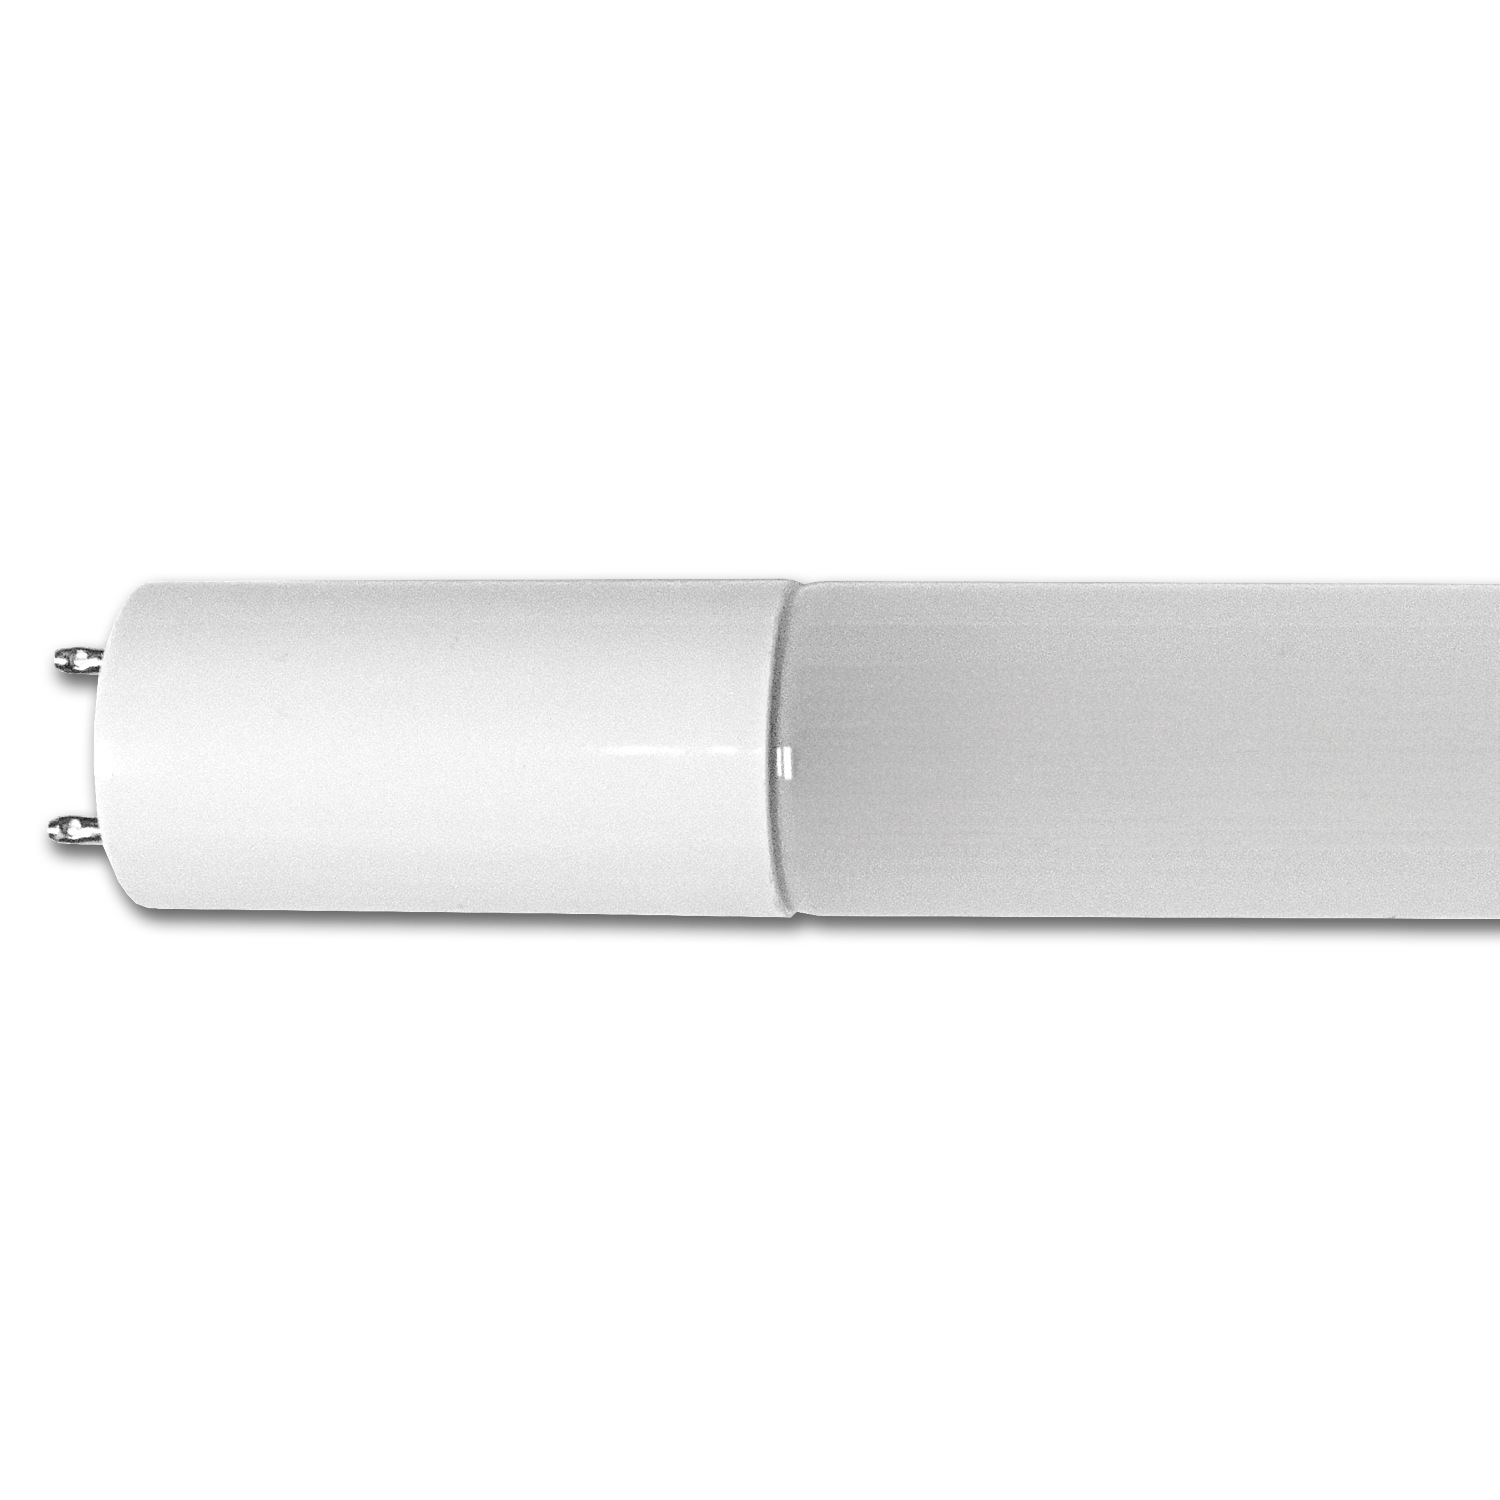 kabine Skæbne arrestordre Chadwell Supply. AC DIRECT INPUT LED REPLACE LAMP FOR 4' T8 FLUORESCENT  5000K 10/CS